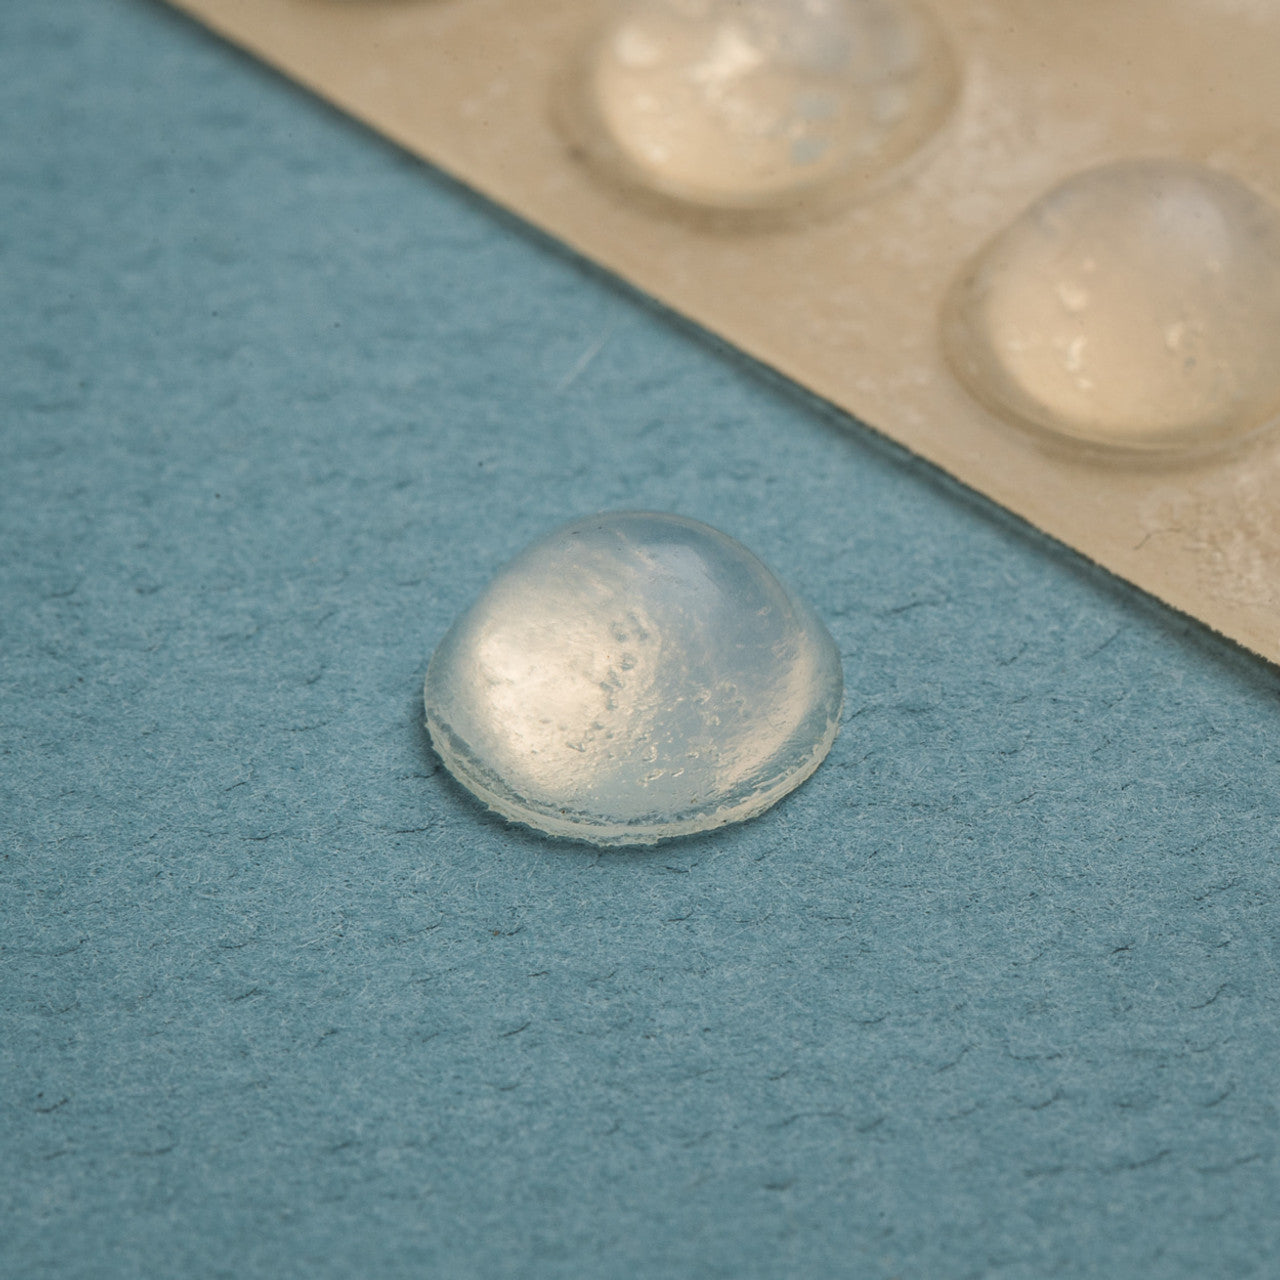  25 clear medium Can Do Bump dots. One silicone rubber bump with adhesive back that adheres to just about any smooth surface. Bumps measure 9.5 mm (.37") in diameter by 3.8 mm (.15") in height.